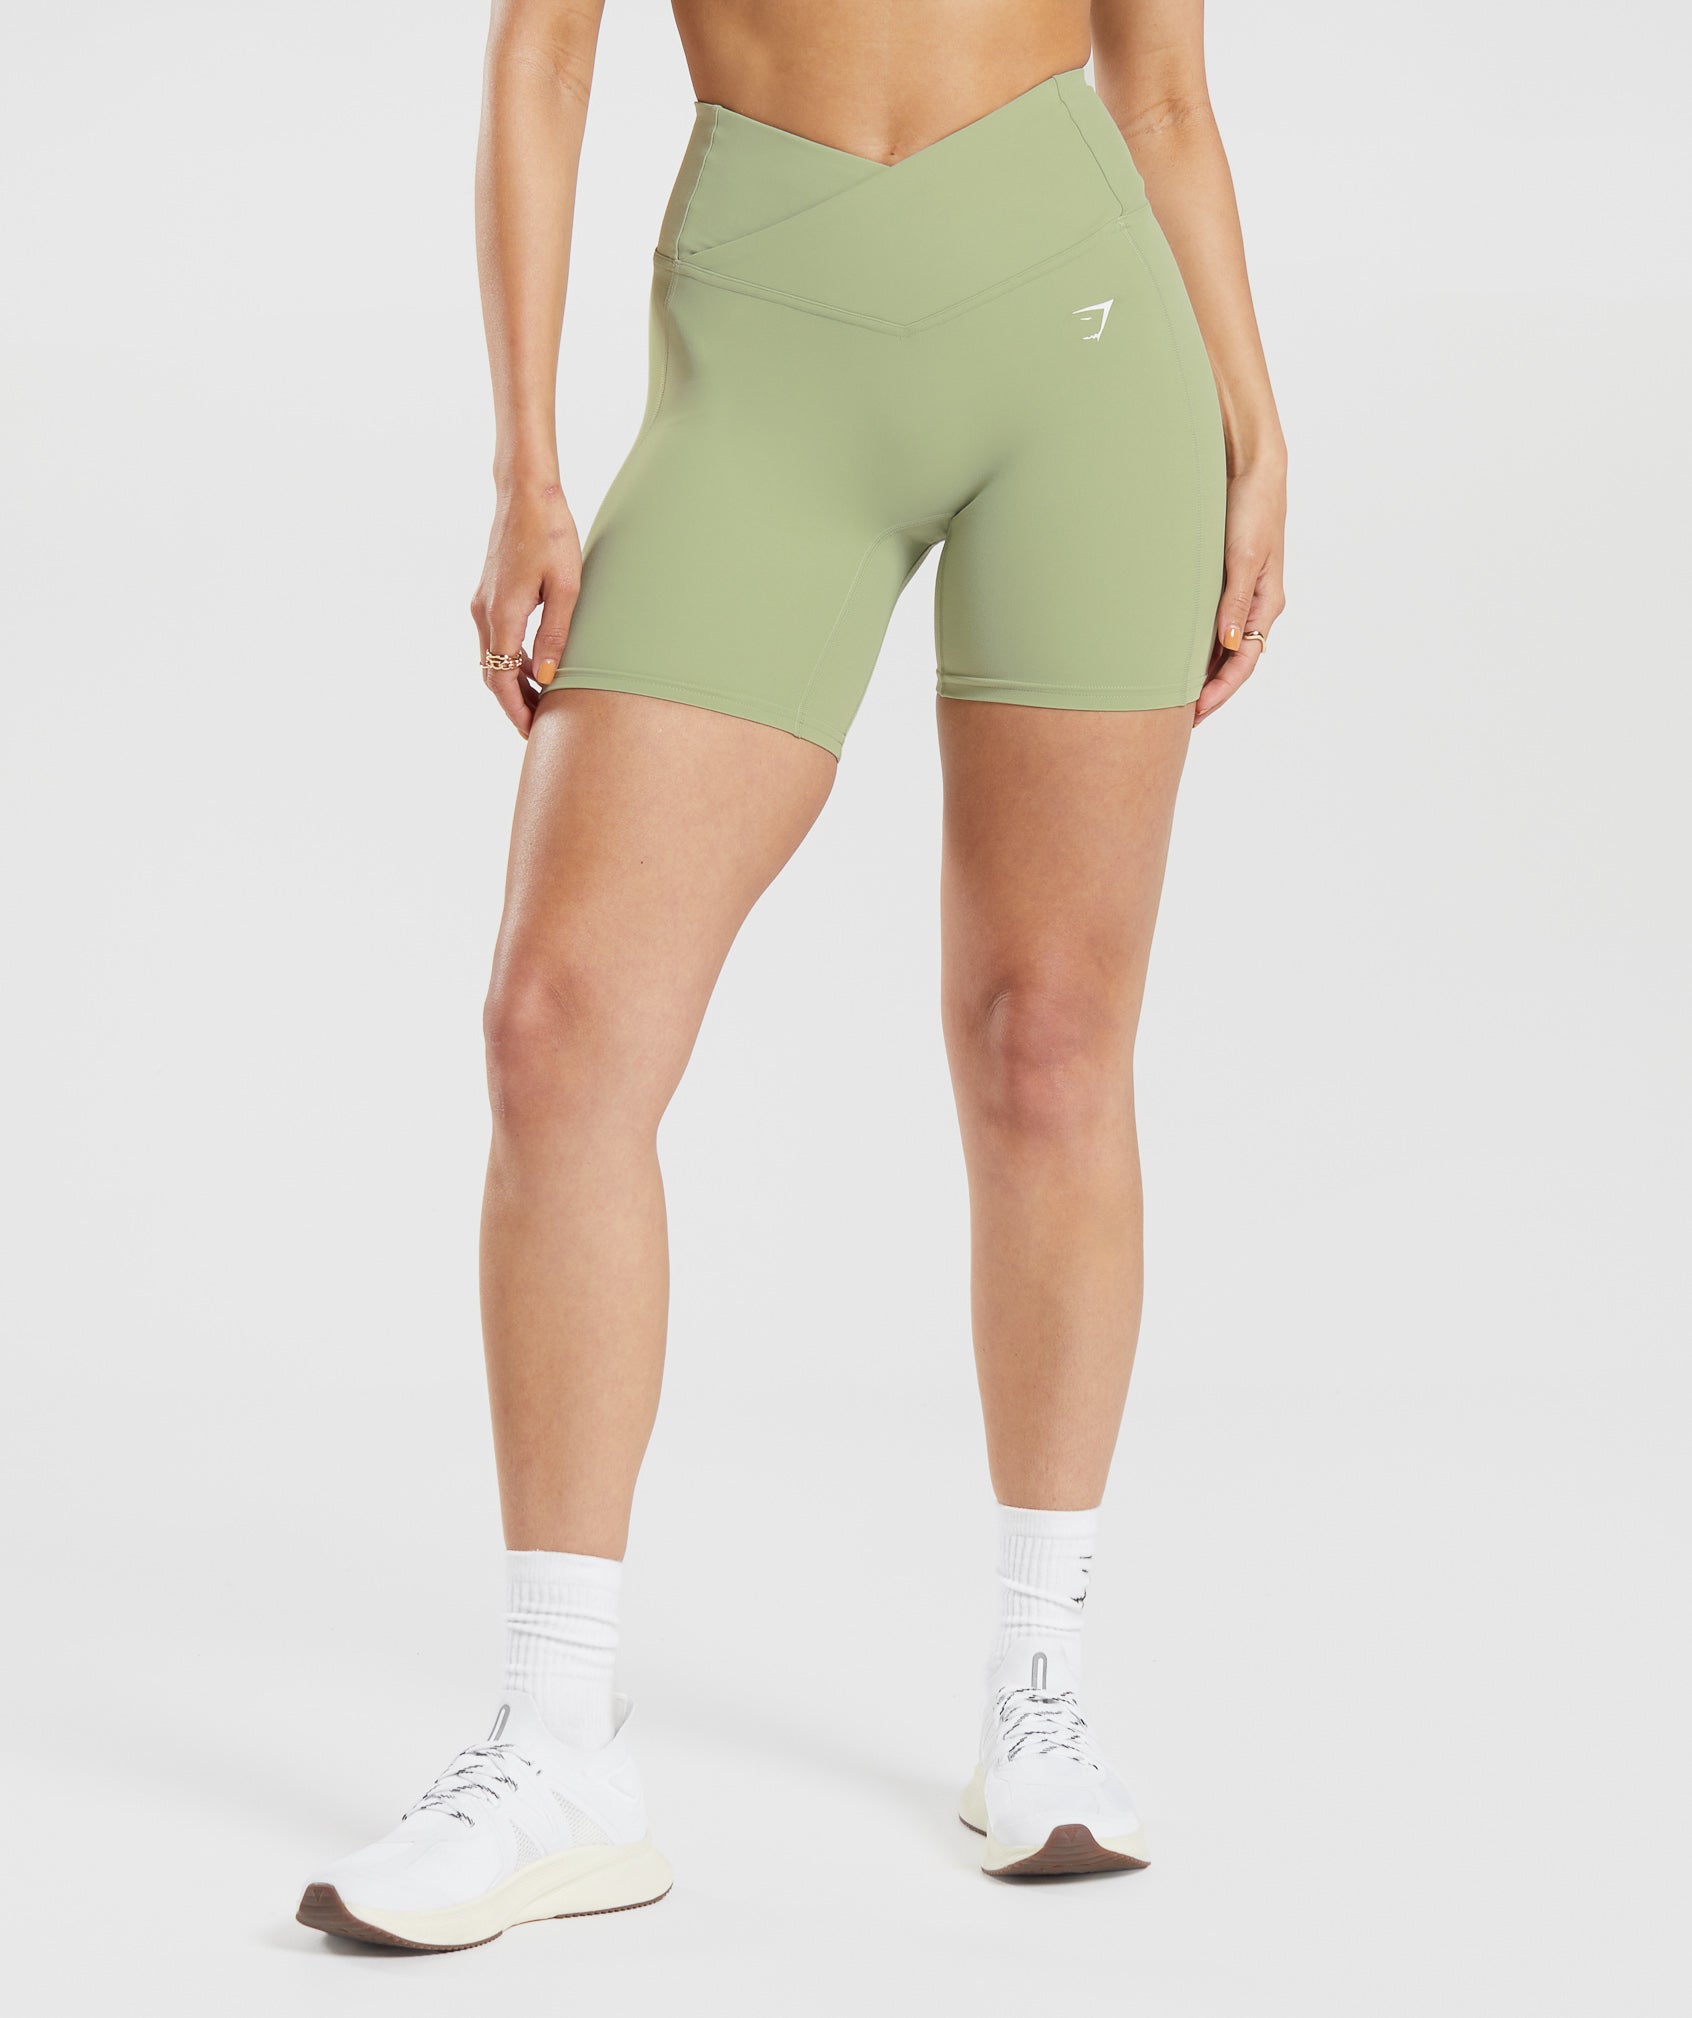 Crossover Shorts in Light Sage Green is out of stock